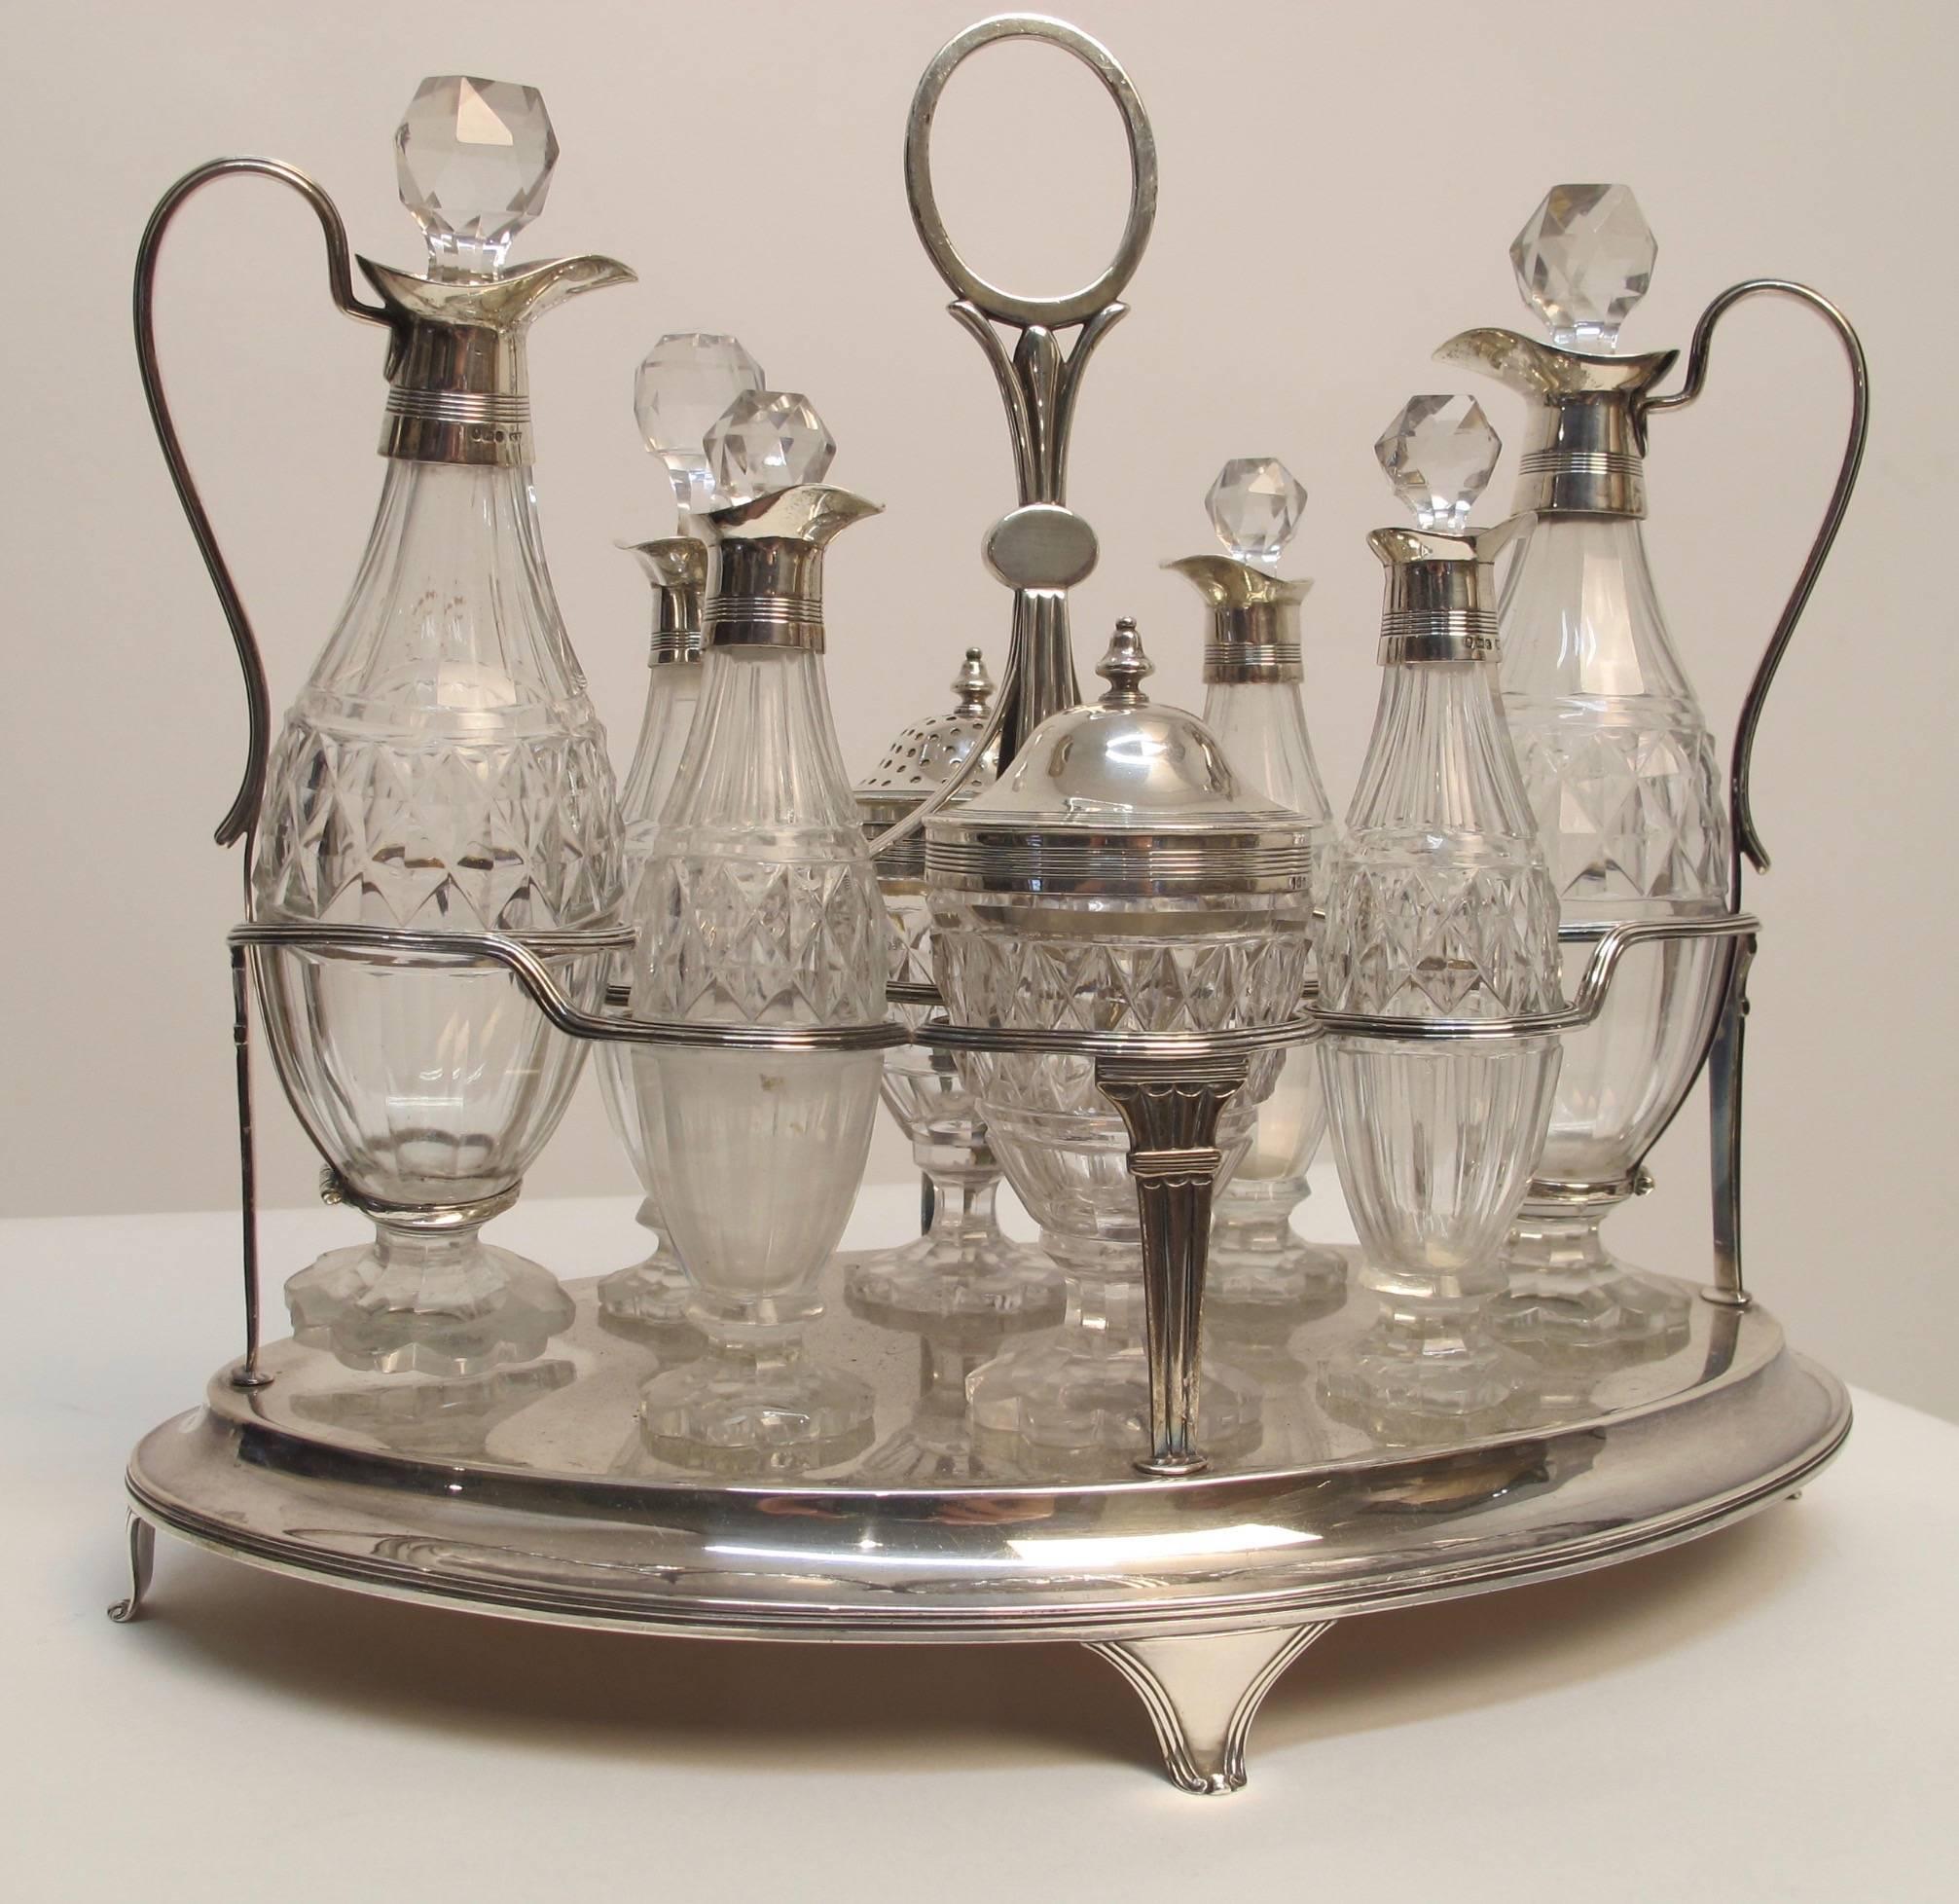 Elaborate glass and sterling silver cruet set, having original cut-glass bottles and jars. Sterling frame and sterling mounts, full hallmarks for London 1800, marked NH for Naphtali Hart.